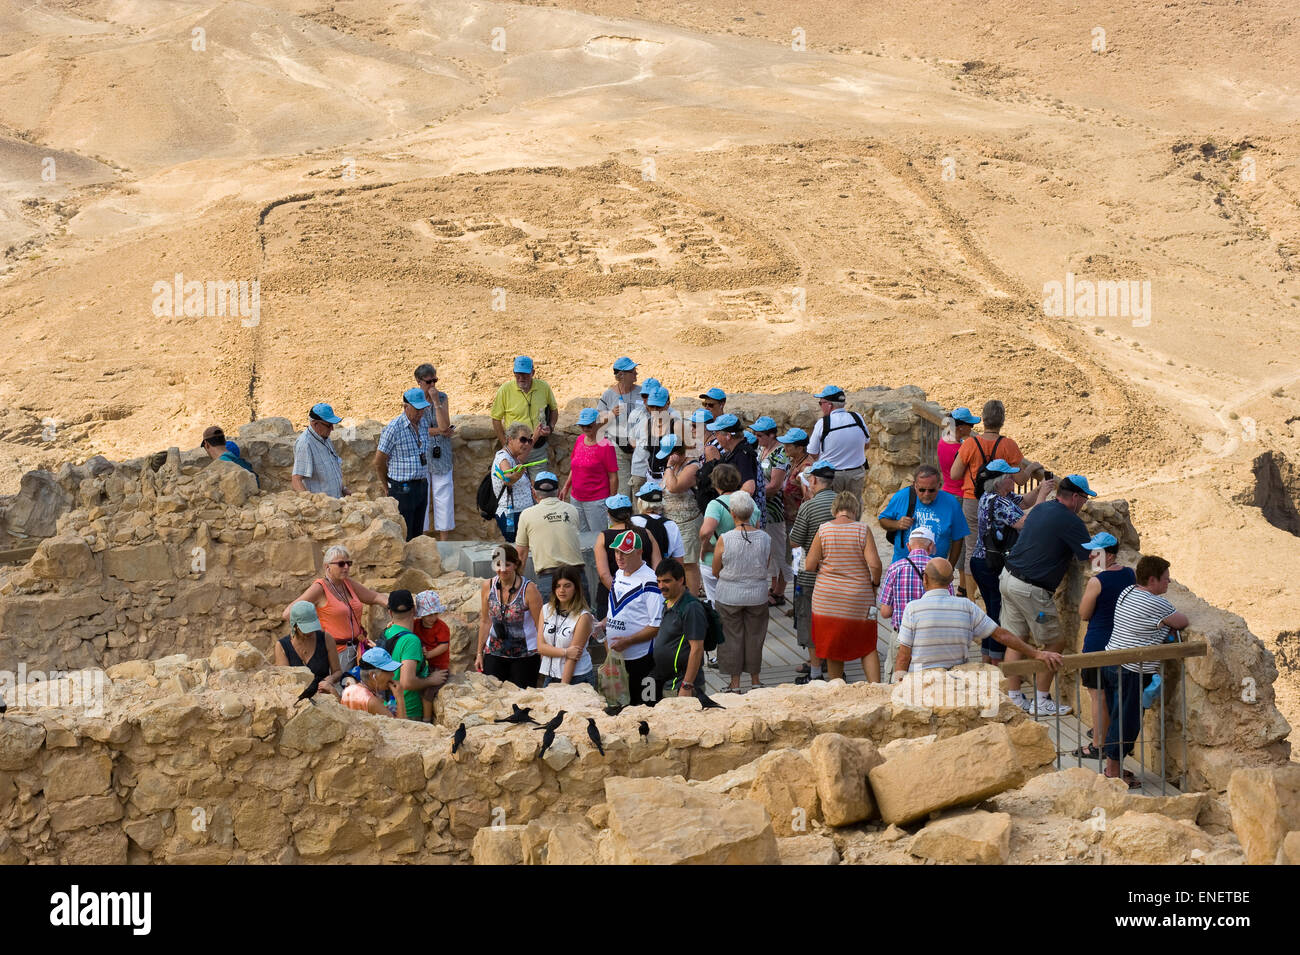 MASADA, ISRAEL - OCT 14, 2014: Tourists on top of the rock Masada in Israel, with a Roman camp on the background Stock Photo